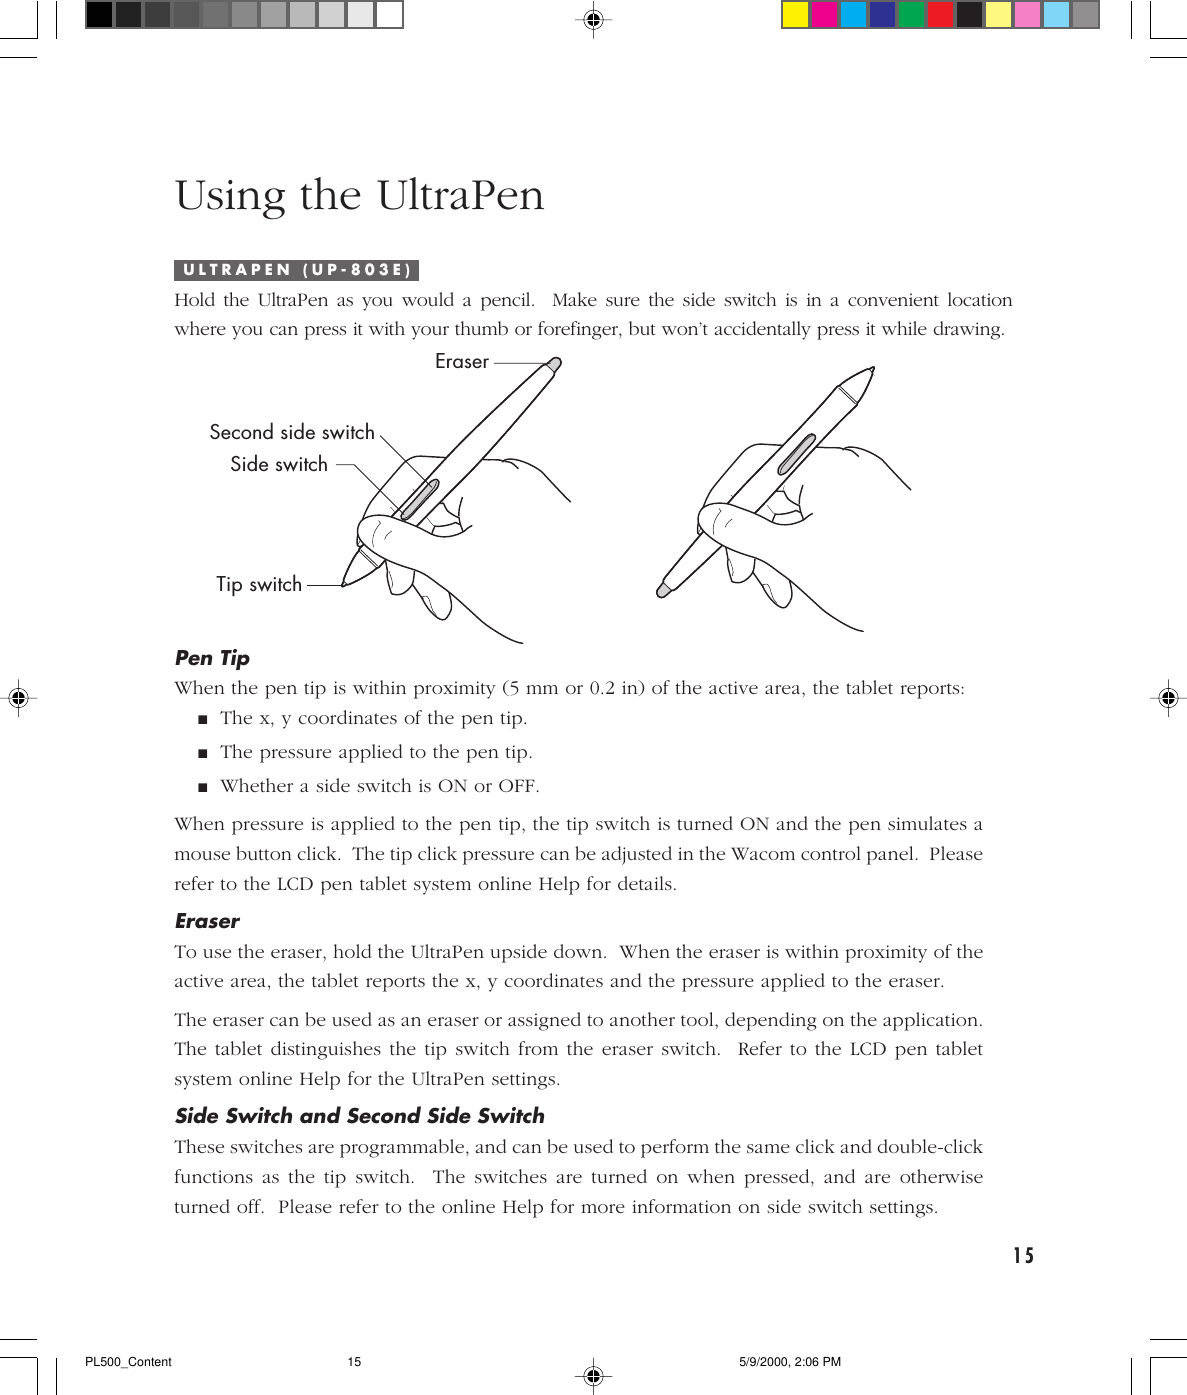 15Using the UltraPenIPen TipWhen the pen tip is within proximity (5 mm or 0.2 in) of the active area, the tablet reports:■The x, y coordinates of the pen tip.■The pressure applied to the pen tip.■Whether a side switch is ON or OFF.When pressure is applied to the pen tip, the tip switch is turned ON and the pen simulates amouse button click.  The tip click pressure can be adjusted in the Wacom control panel.  Pleaserefer to the LCD pen tablet system online Help for details.EraserTo use the eraser, hold the UltraPen upside down.  When the eraser is within proximity of theactive area, the tablet reports the x, y coordinates and the pressure applied to the eraser.The eraser can be used as an eraser or assigned to another tool, depending on the application.The tablet distinguishes the tip switch from the eraser switch.  Refer to the LCD pen tabletsystem online Help for the UltraPen settings.Side Switch and Second Side SwitchThese switches are programmable, and can be used to perform the same click and double-clickfunctions as the tip switch.  The switches are turned on when pressed, and are otherwiseturned off.  Please refer to the online Help for more information on side switch settings.U L T R A P E N   ( U P - 8 0 3 E )Hold the UltraPen as you would a pencil.  Make sure the side switch is in a convenient locationwhere you can press it with your thumb or forefinger, but won’t accidentally press it while drawing.EraserSecond side switchSide switchTip switchPL500_Content 5/9/2000, 2:06 PM15